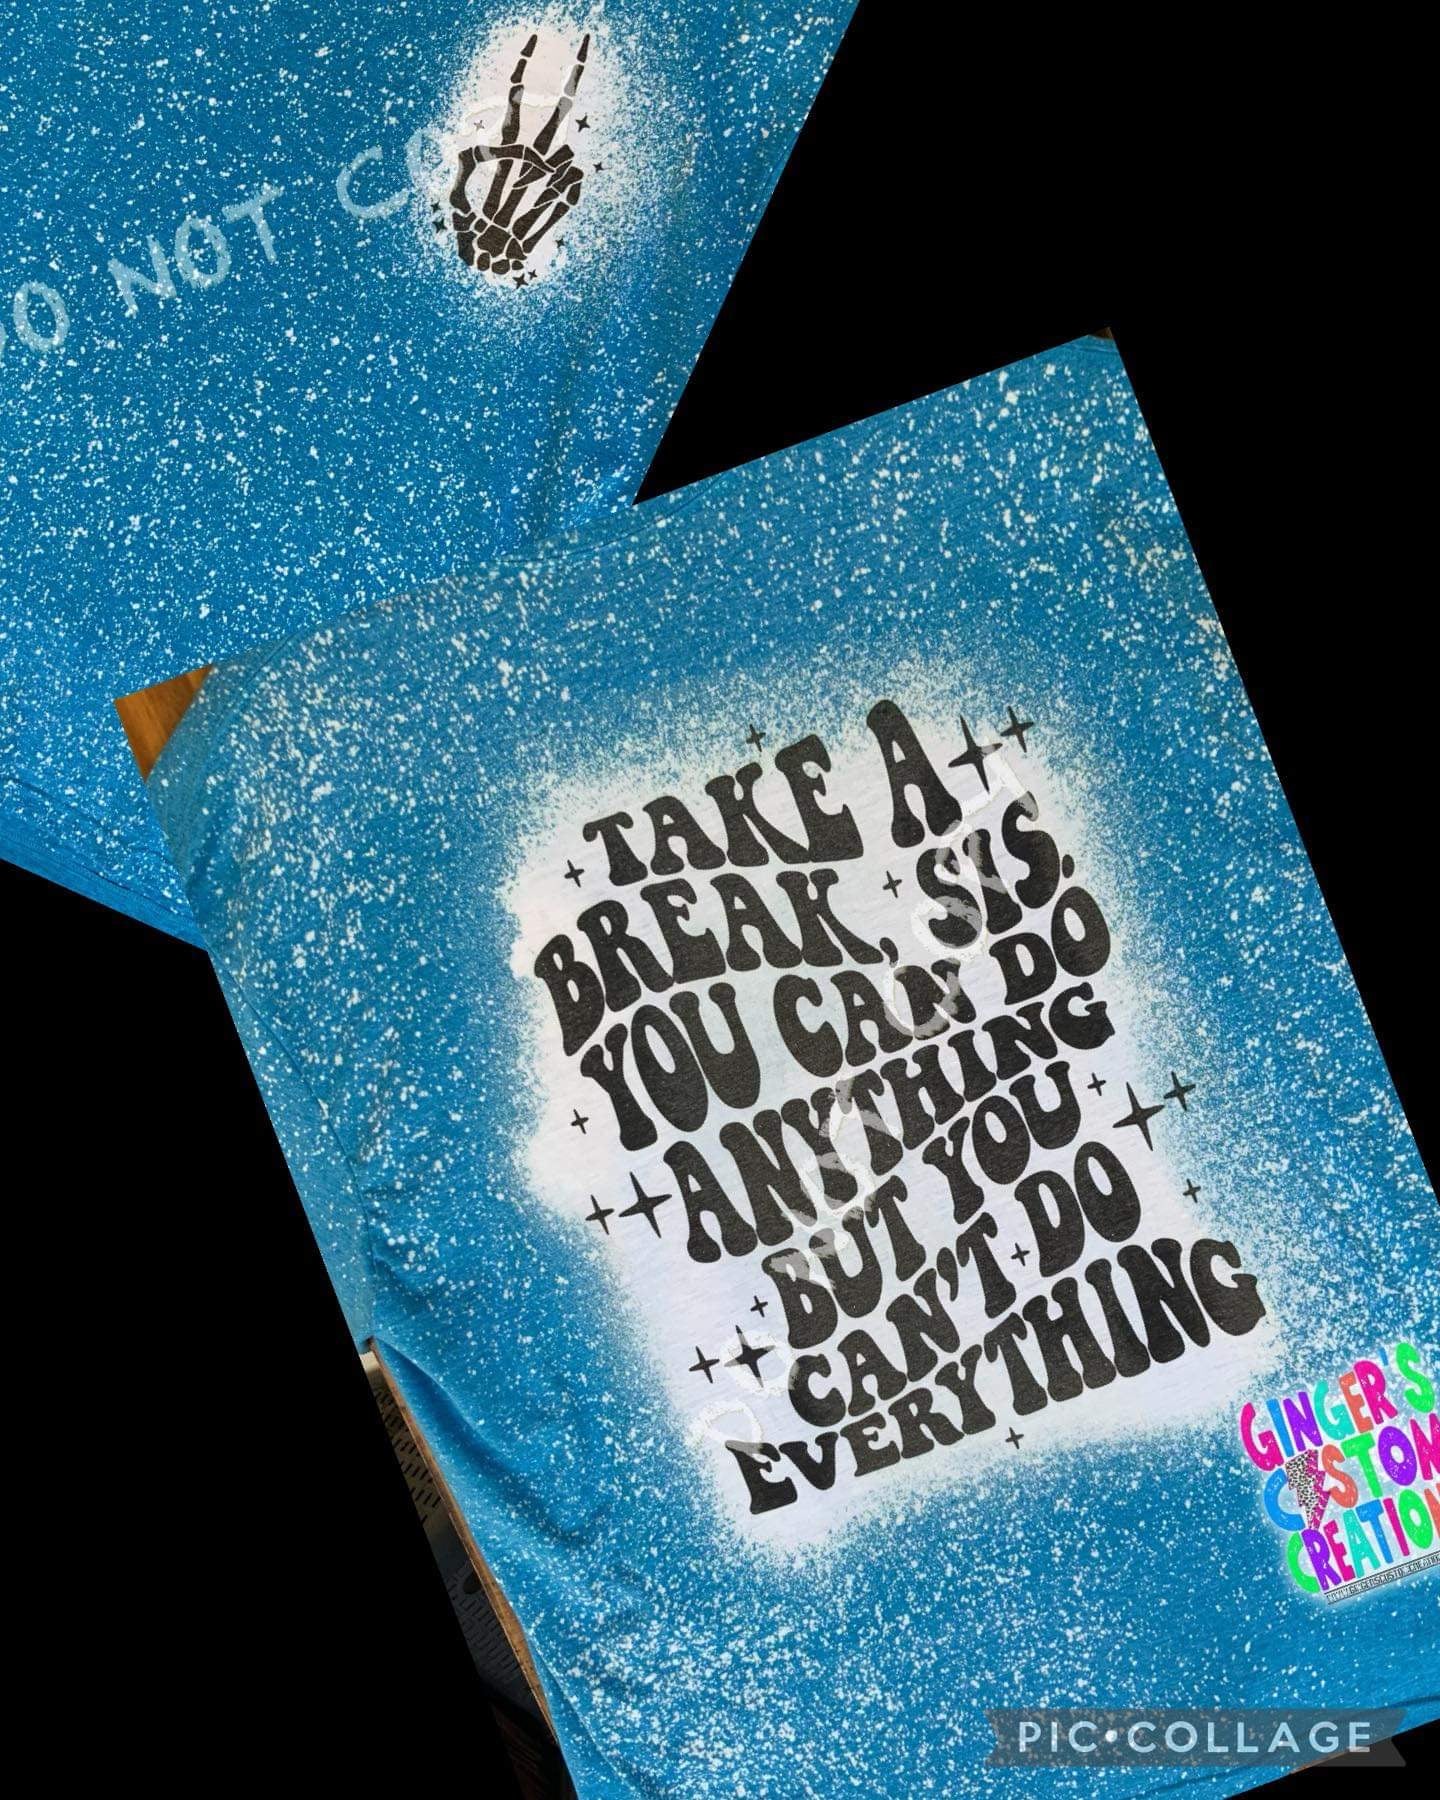 Take a break sis you can do anything  - front&back   - BLEACHED TSHIRT